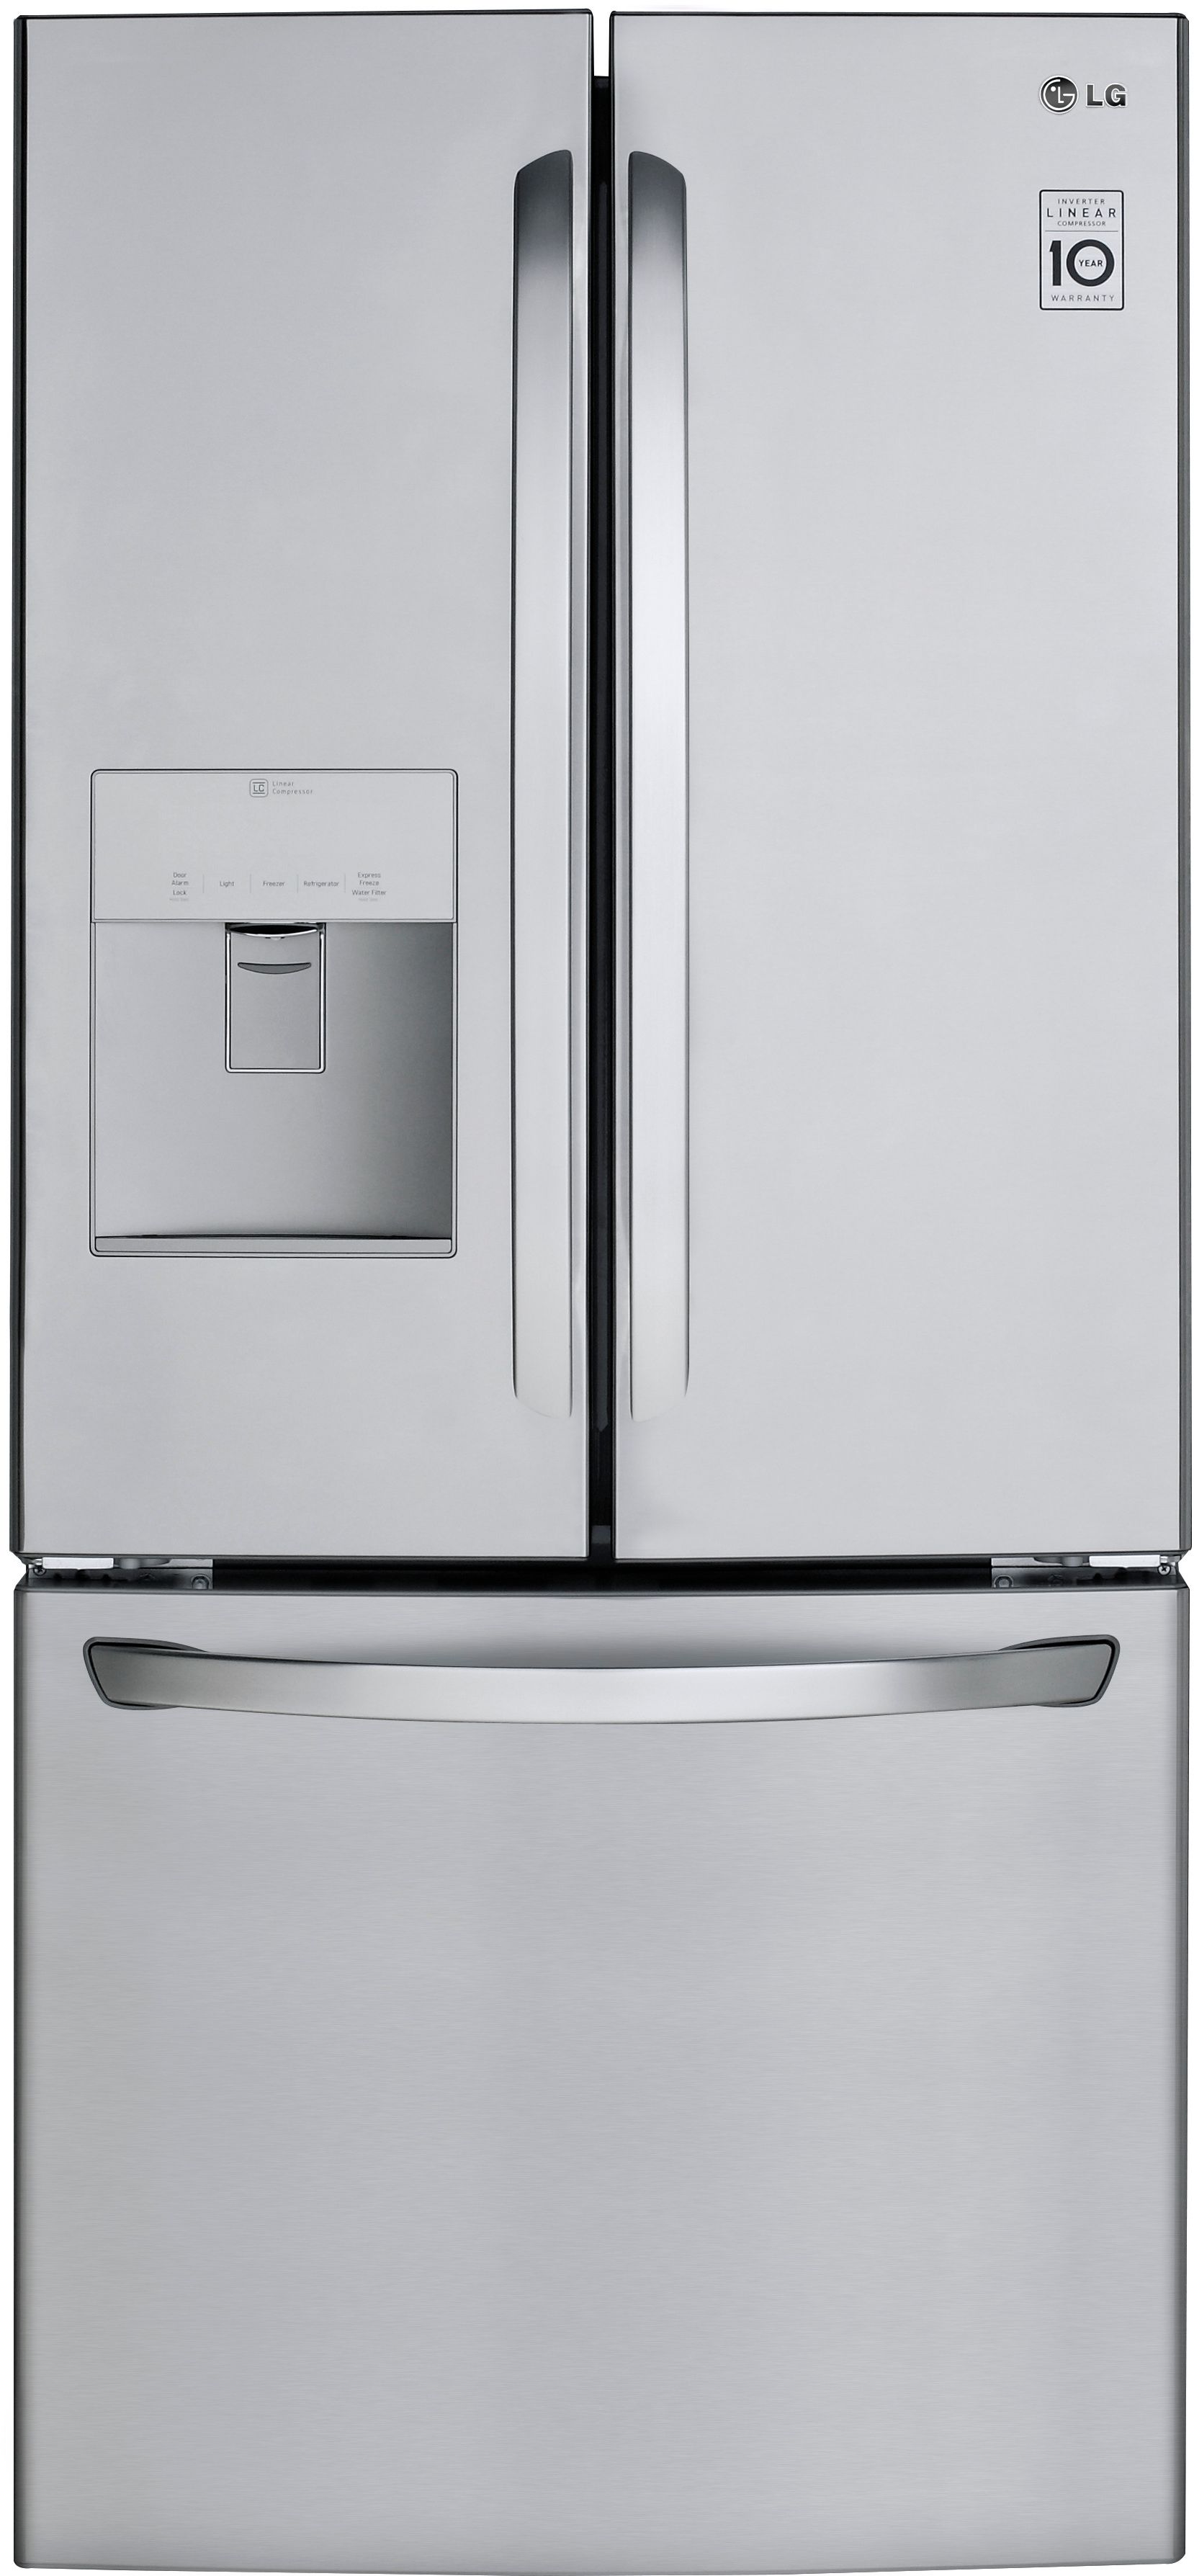 Front view of LG LFDS22520S 30” French door refrigerator 